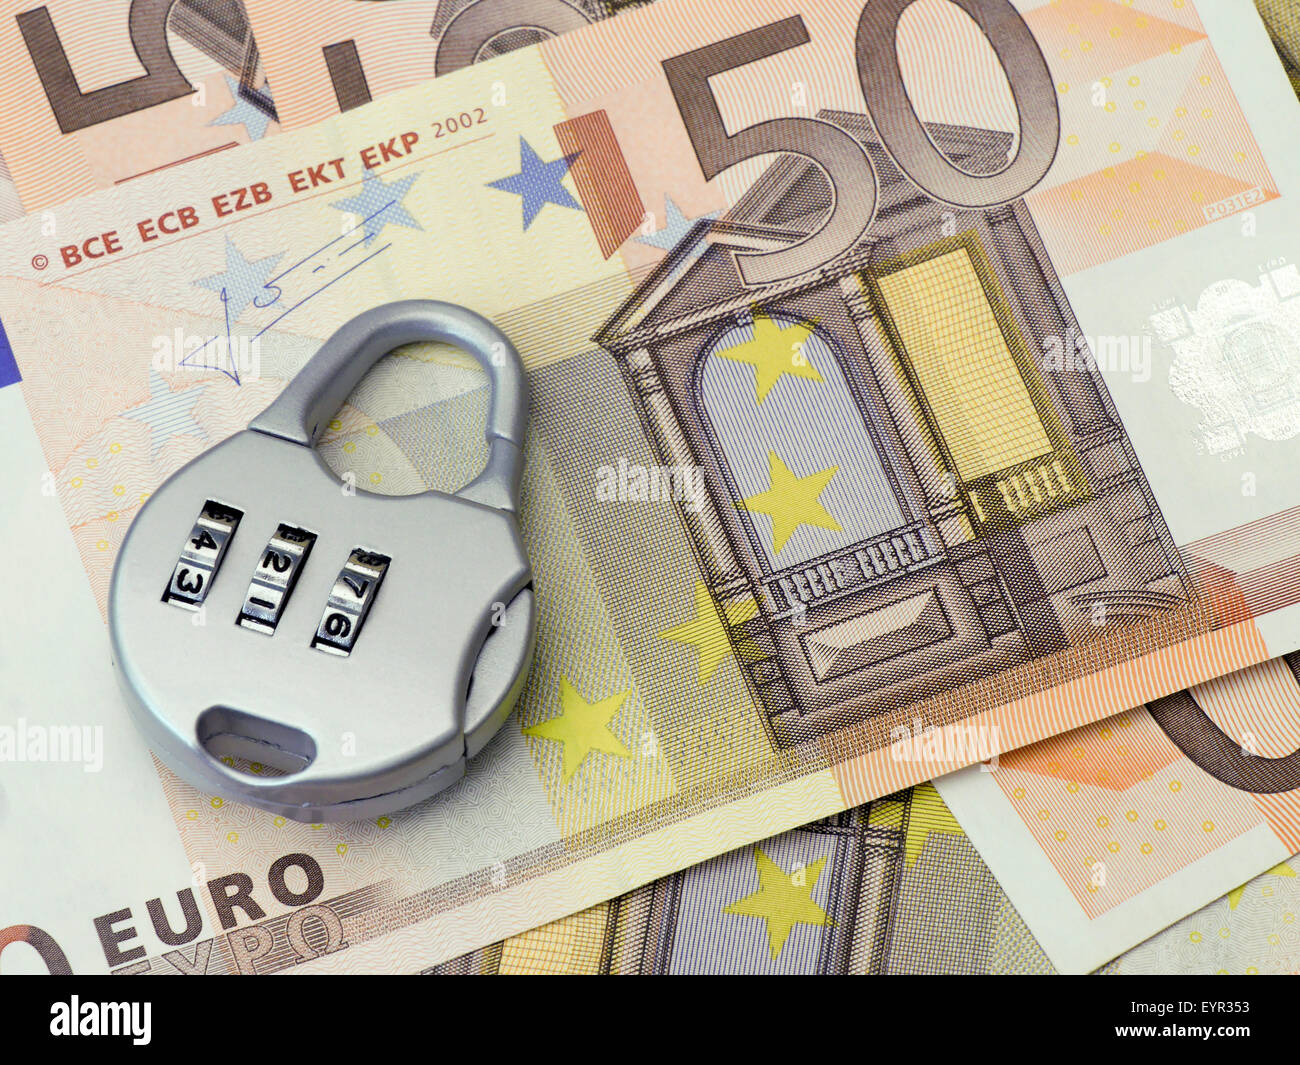 Combination padlock rests on Fifty Euro banknotes Stock Photo